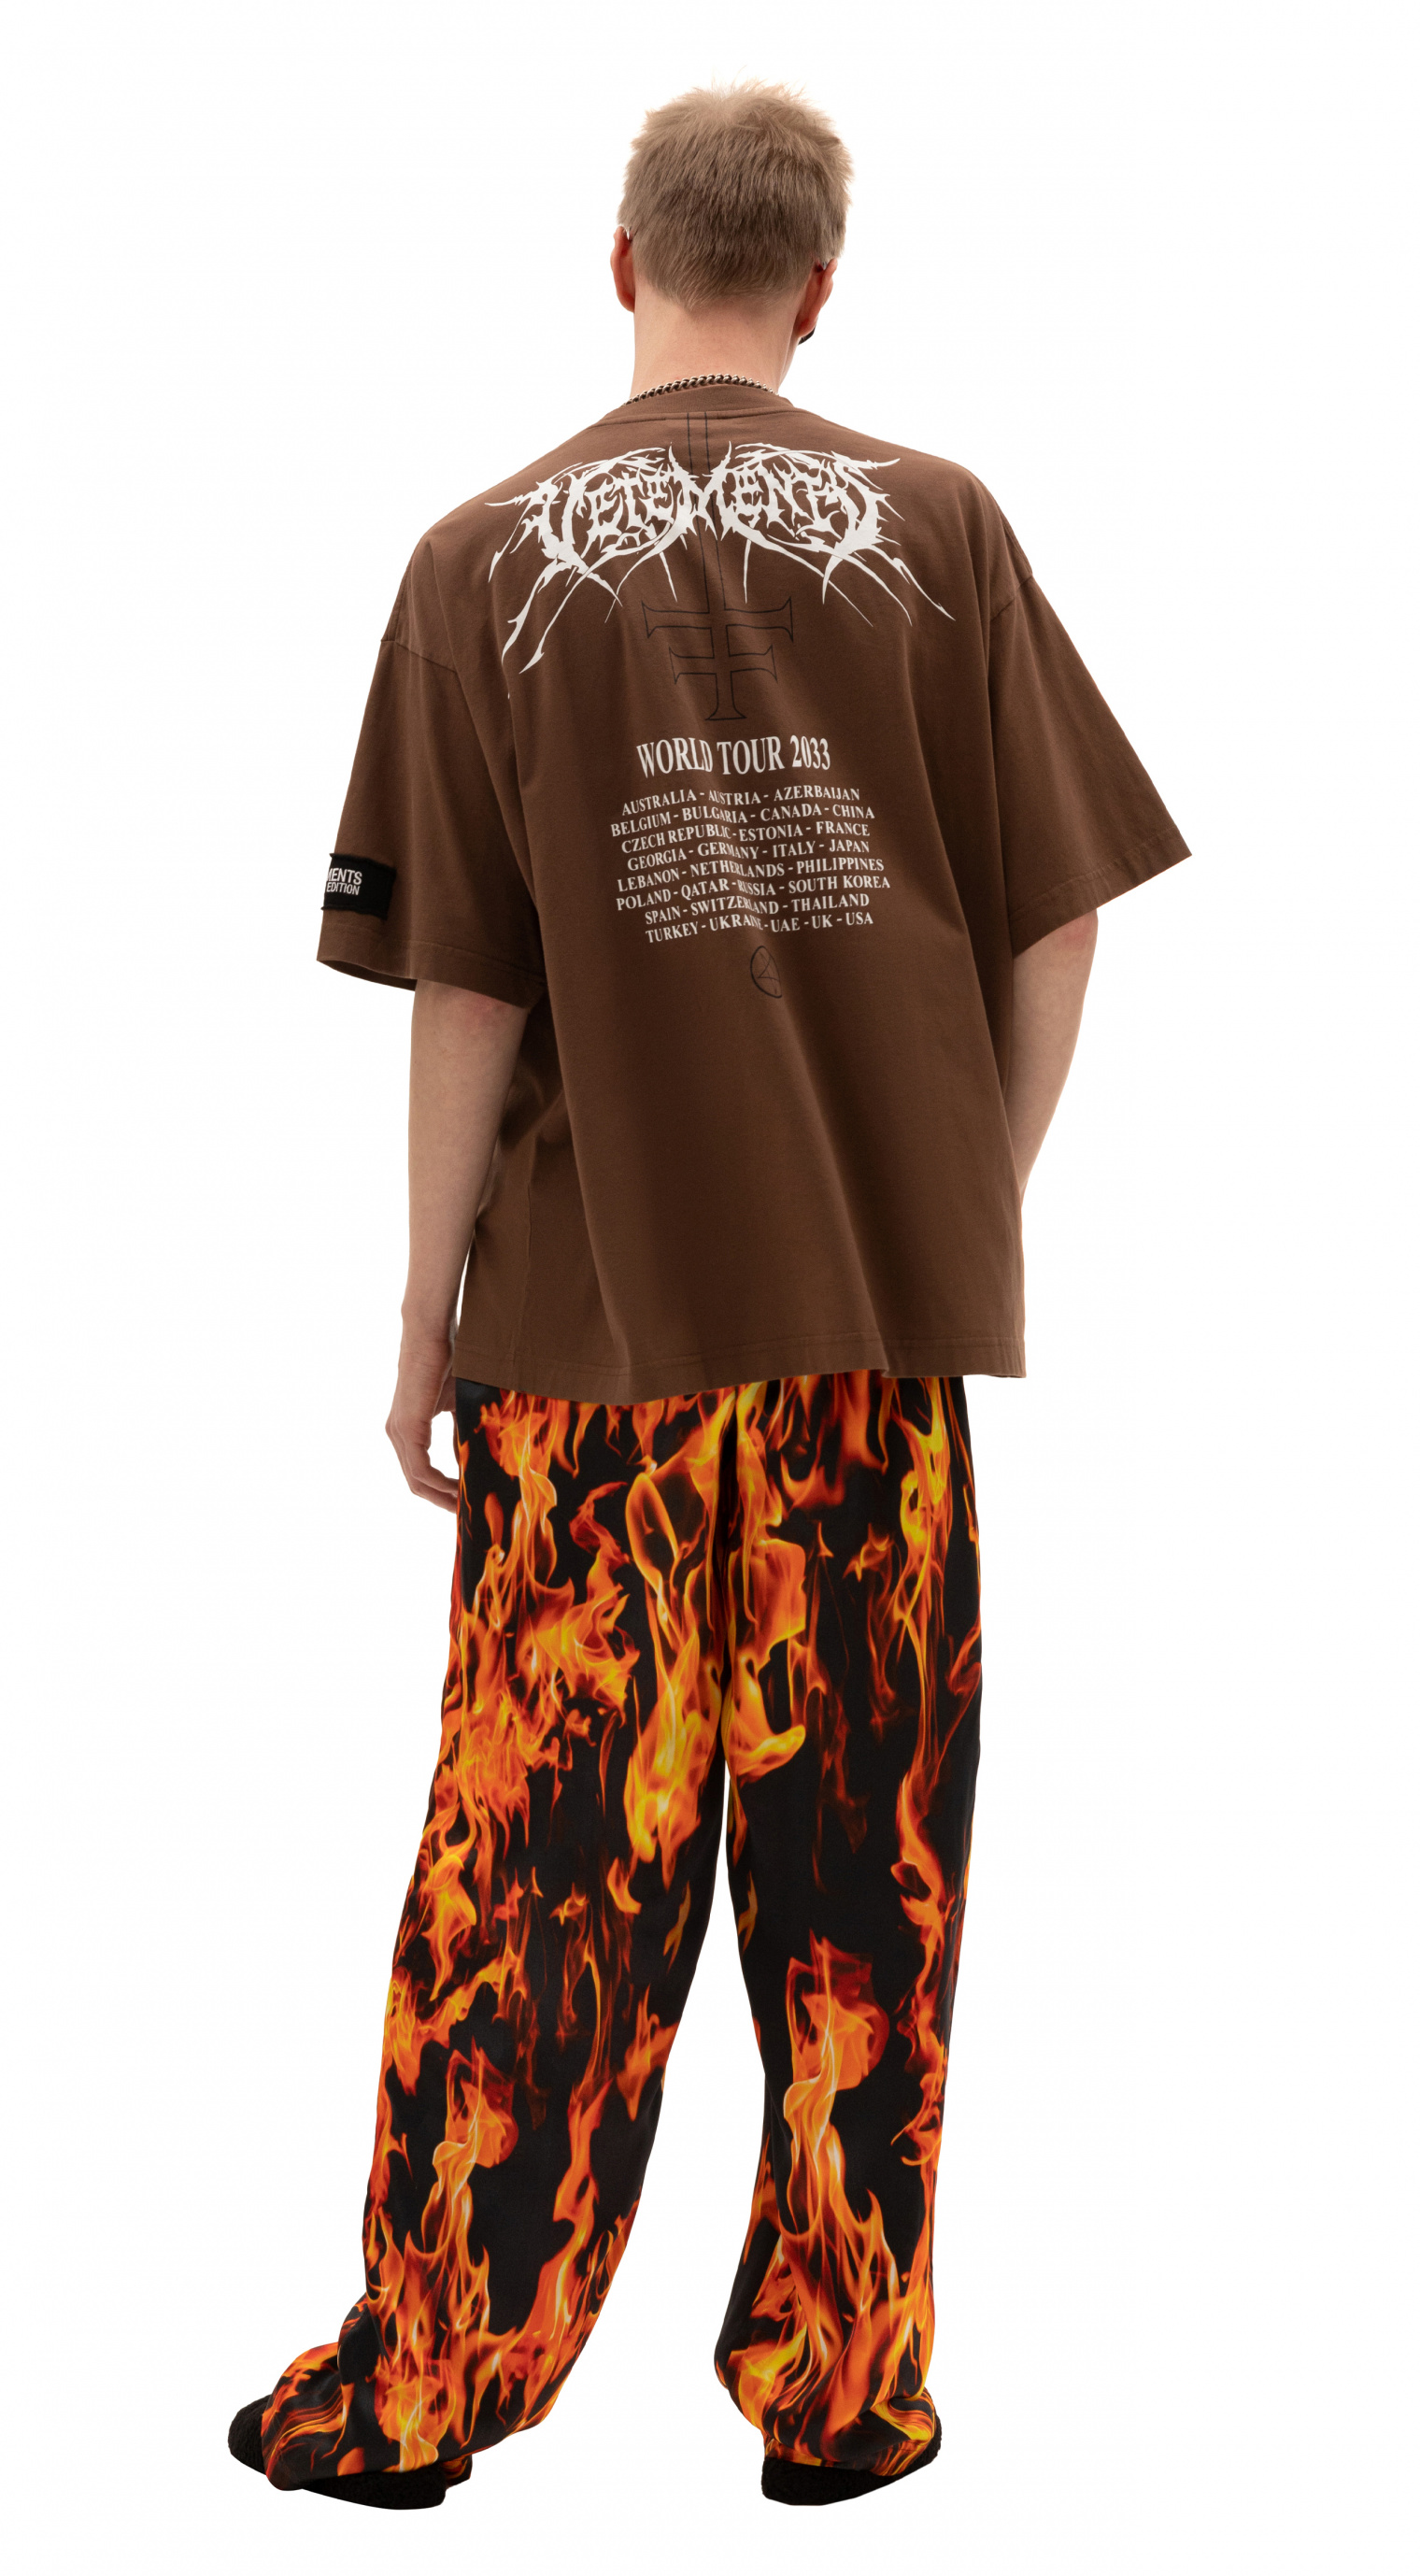 Buy VETEMENTS men brown world tour patched t-shirt for €345 online